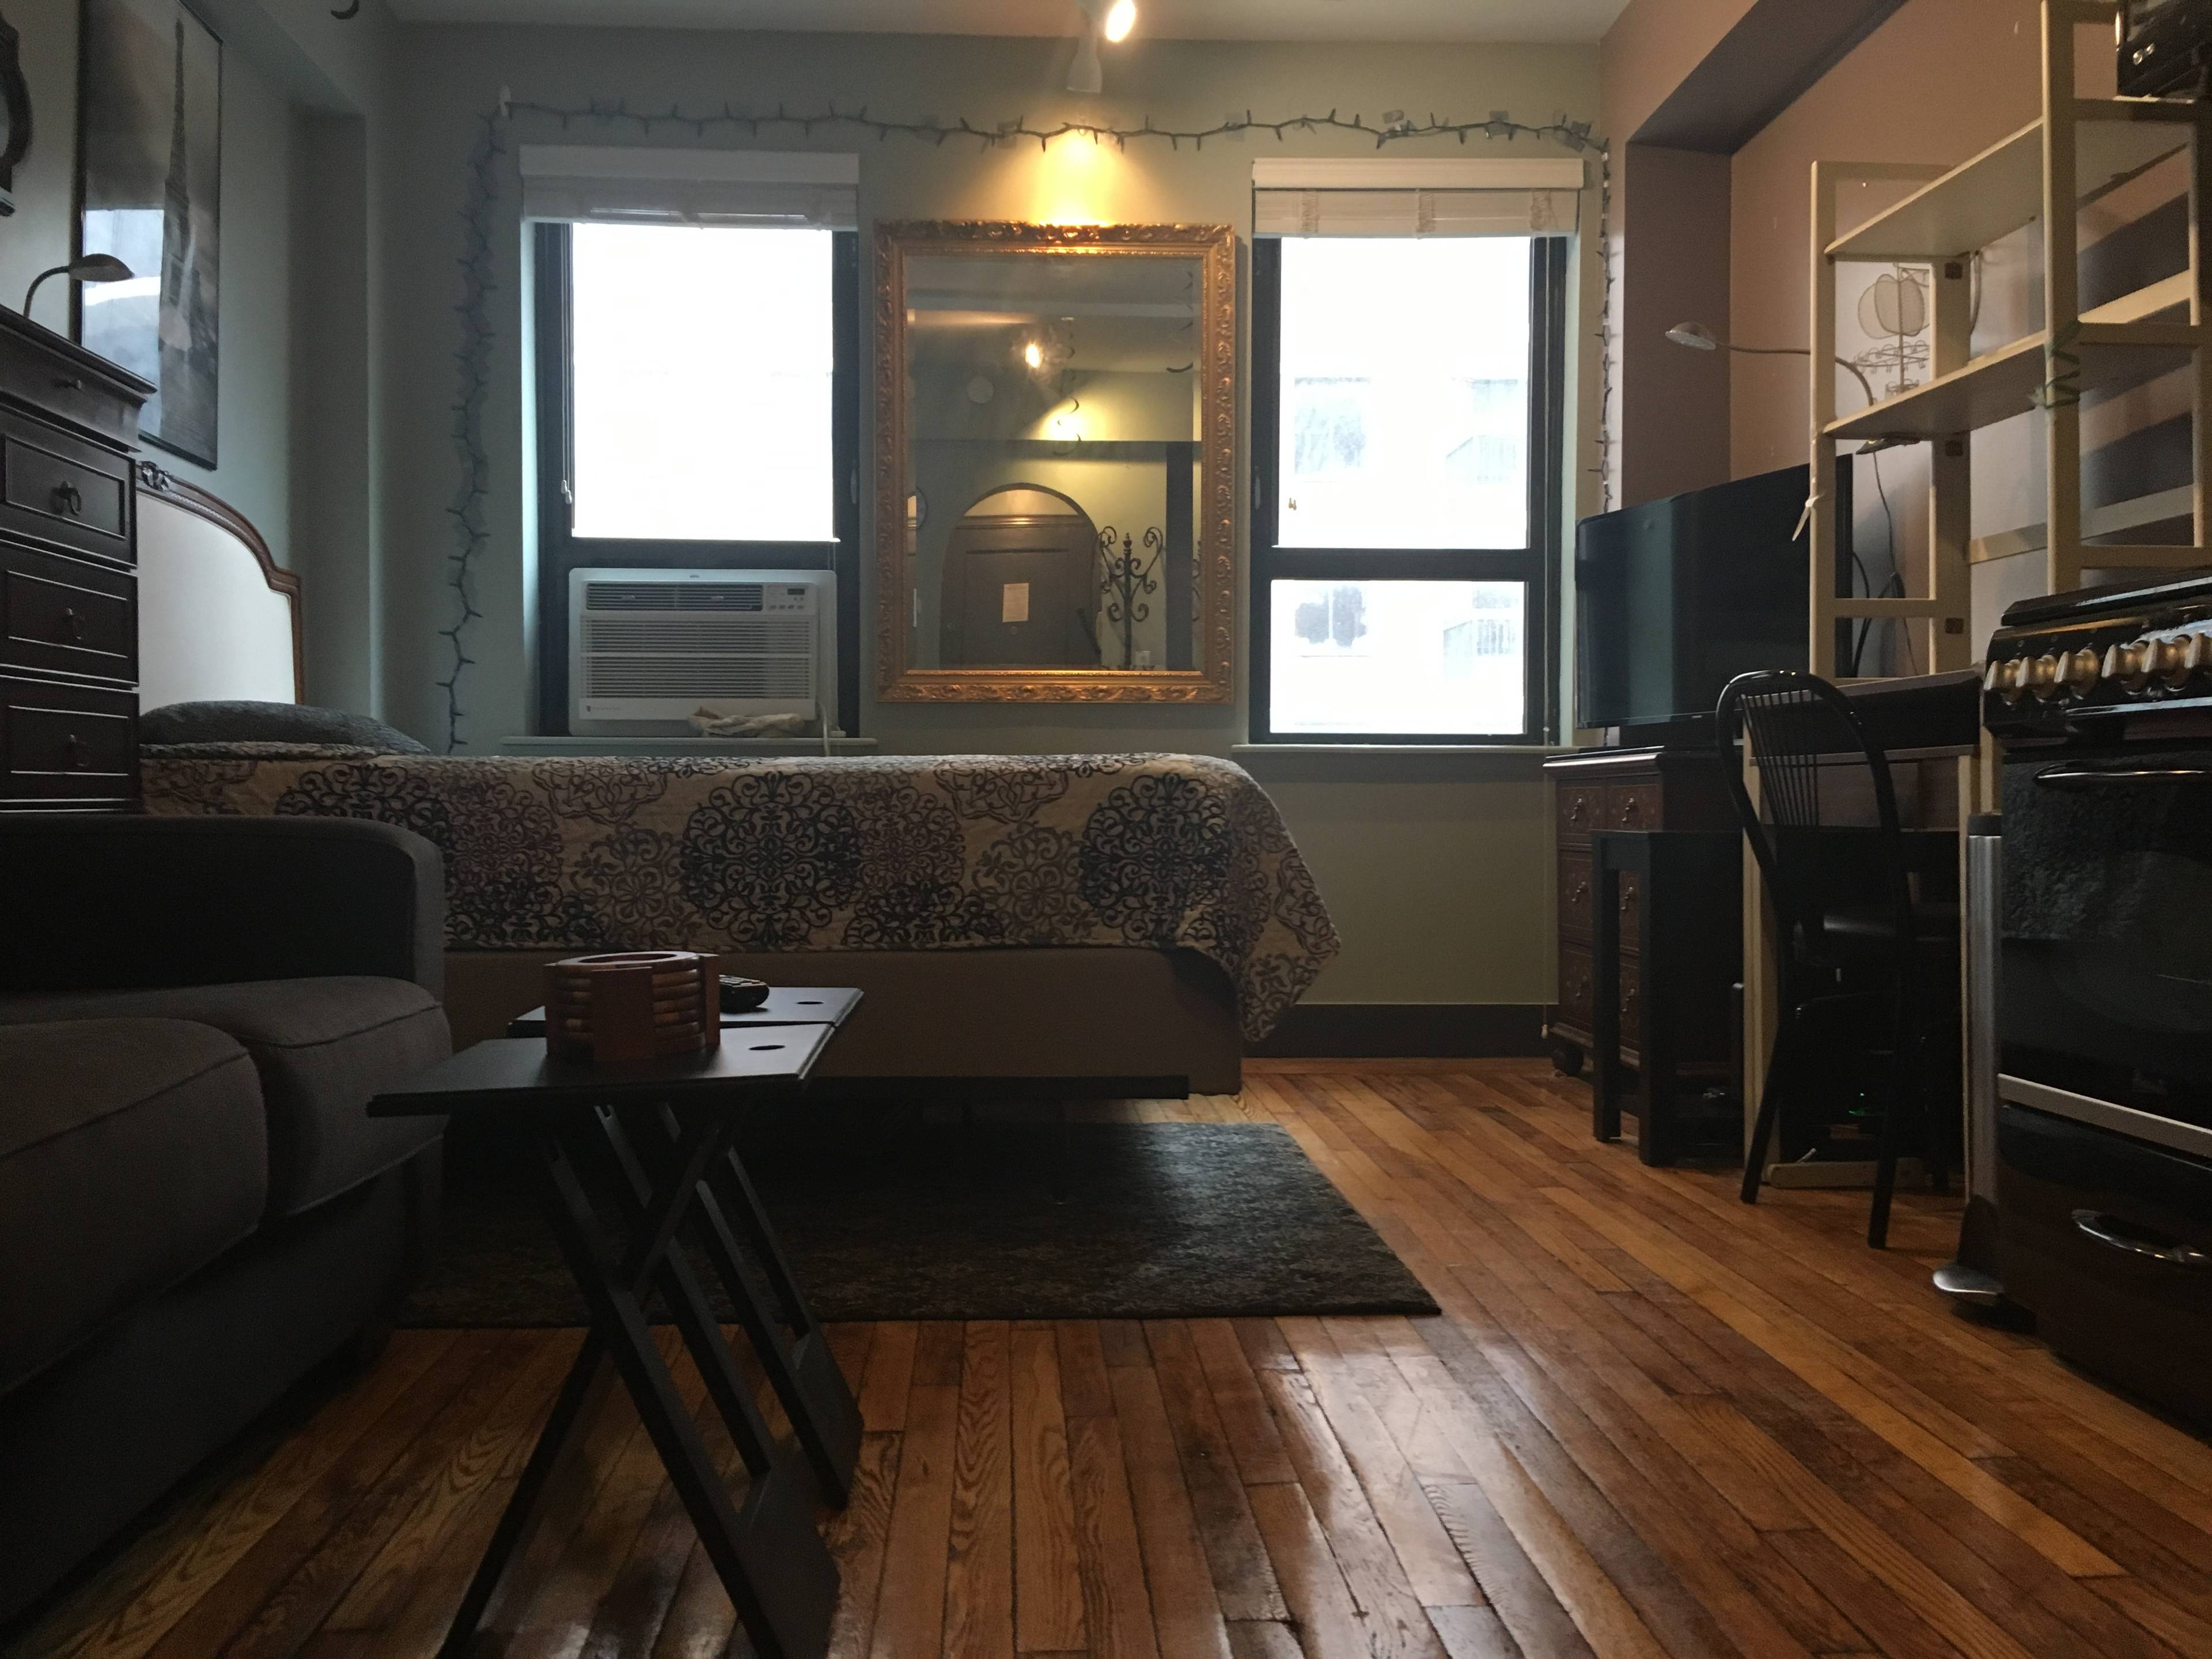 Furnished Studio! for Rent by NYU in Greenwich Village - Available June1 - Students and International Renters Welcome!